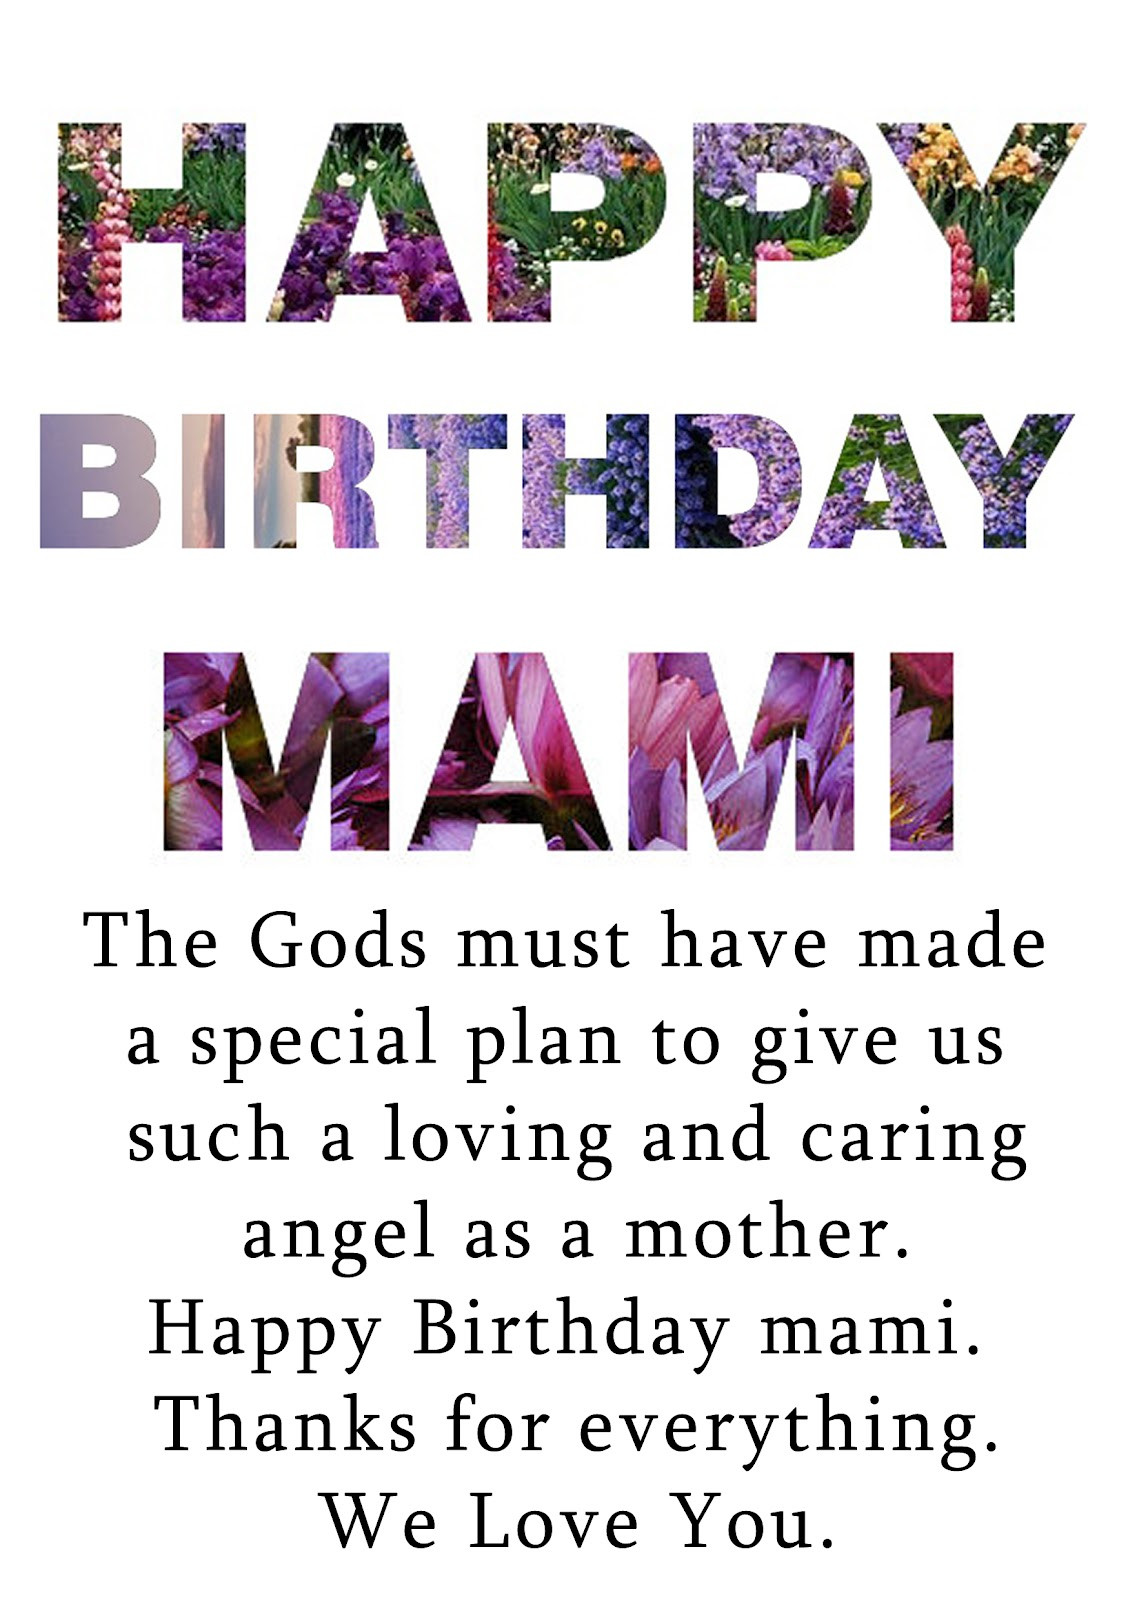 Quote For Dead Mother
 Dead Mother Birthday Quotes QuotesGram